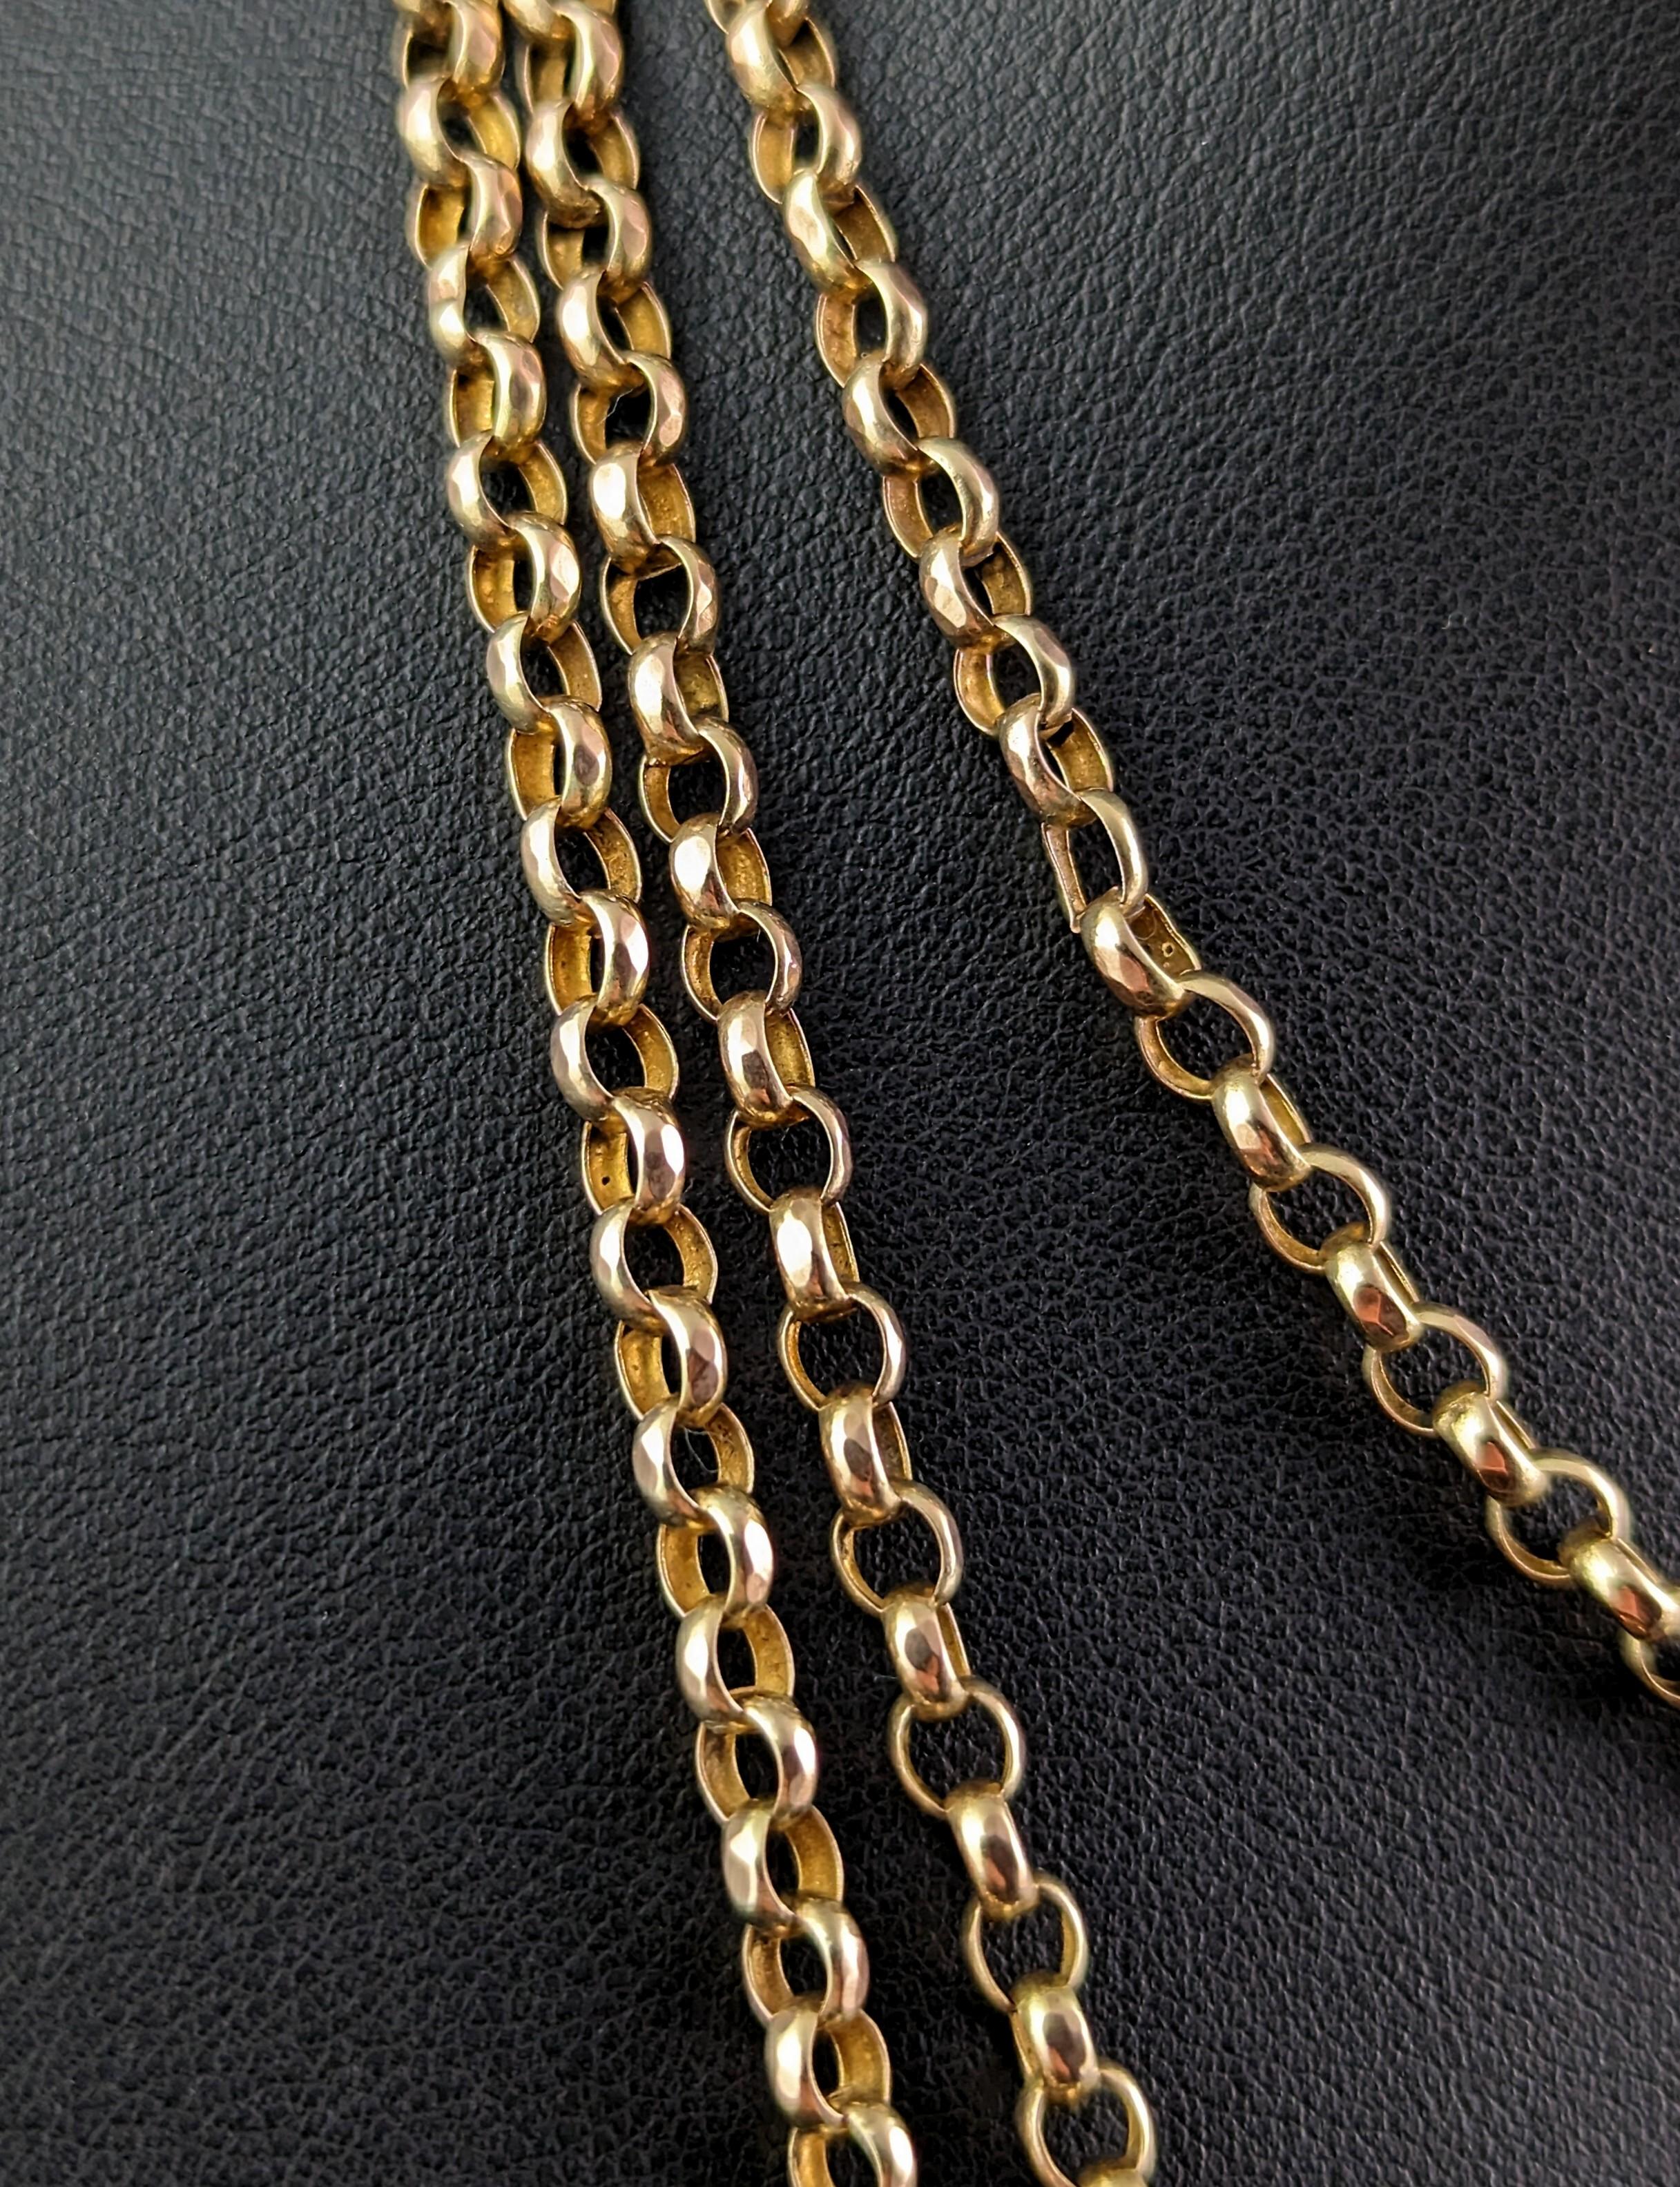 Antique 9k Gold Longuard Chain Necklace, Rolo Link, Muff Chain 1